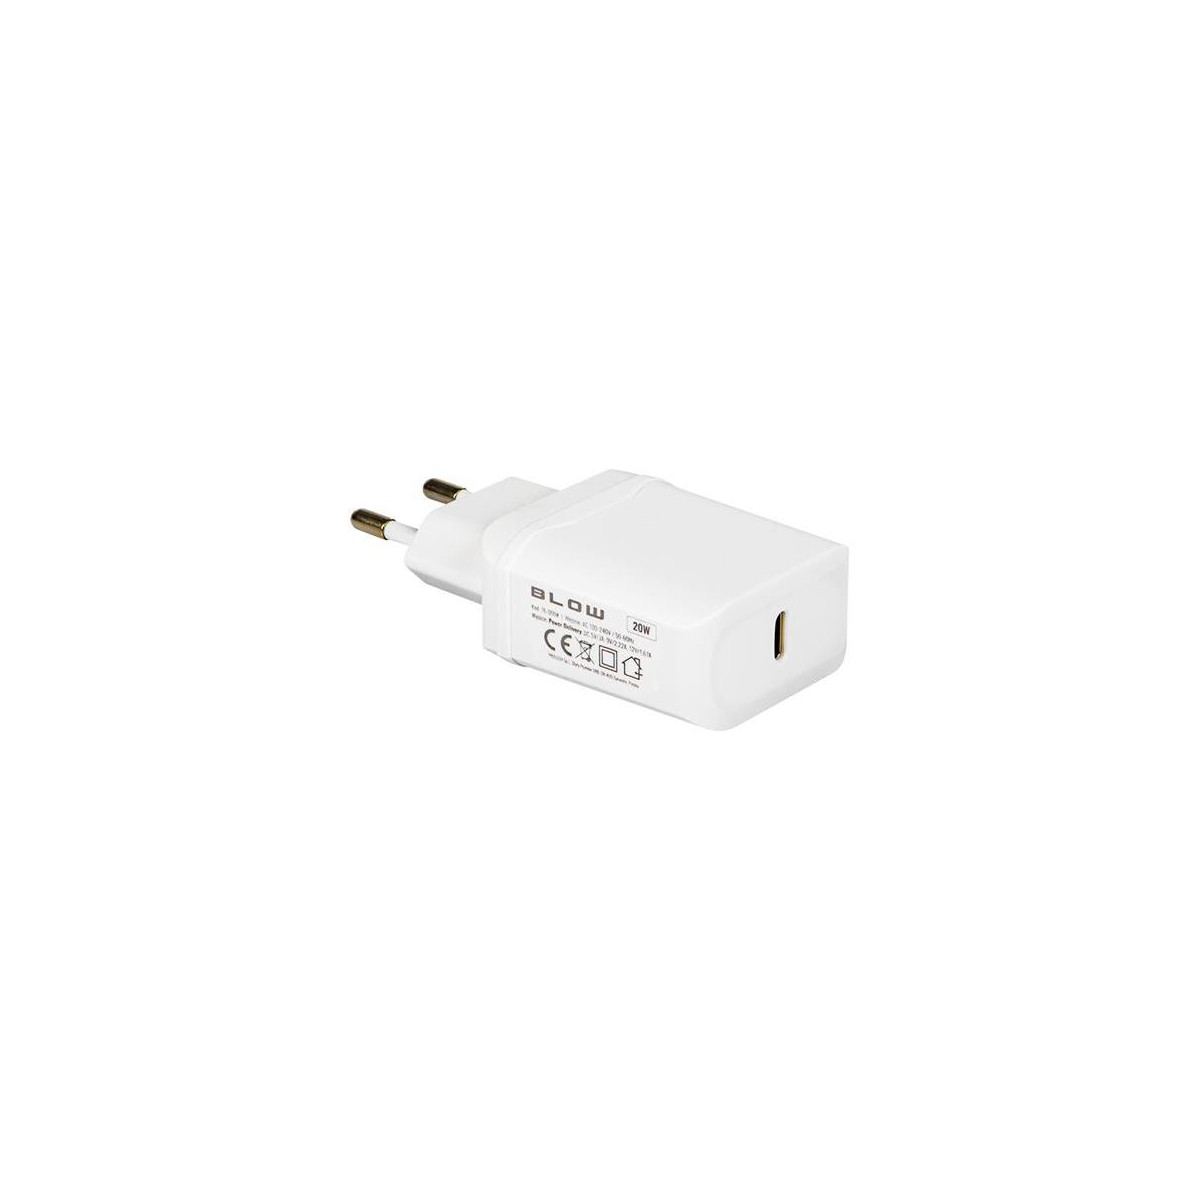 More about Adaptér USB BLOW 76-009